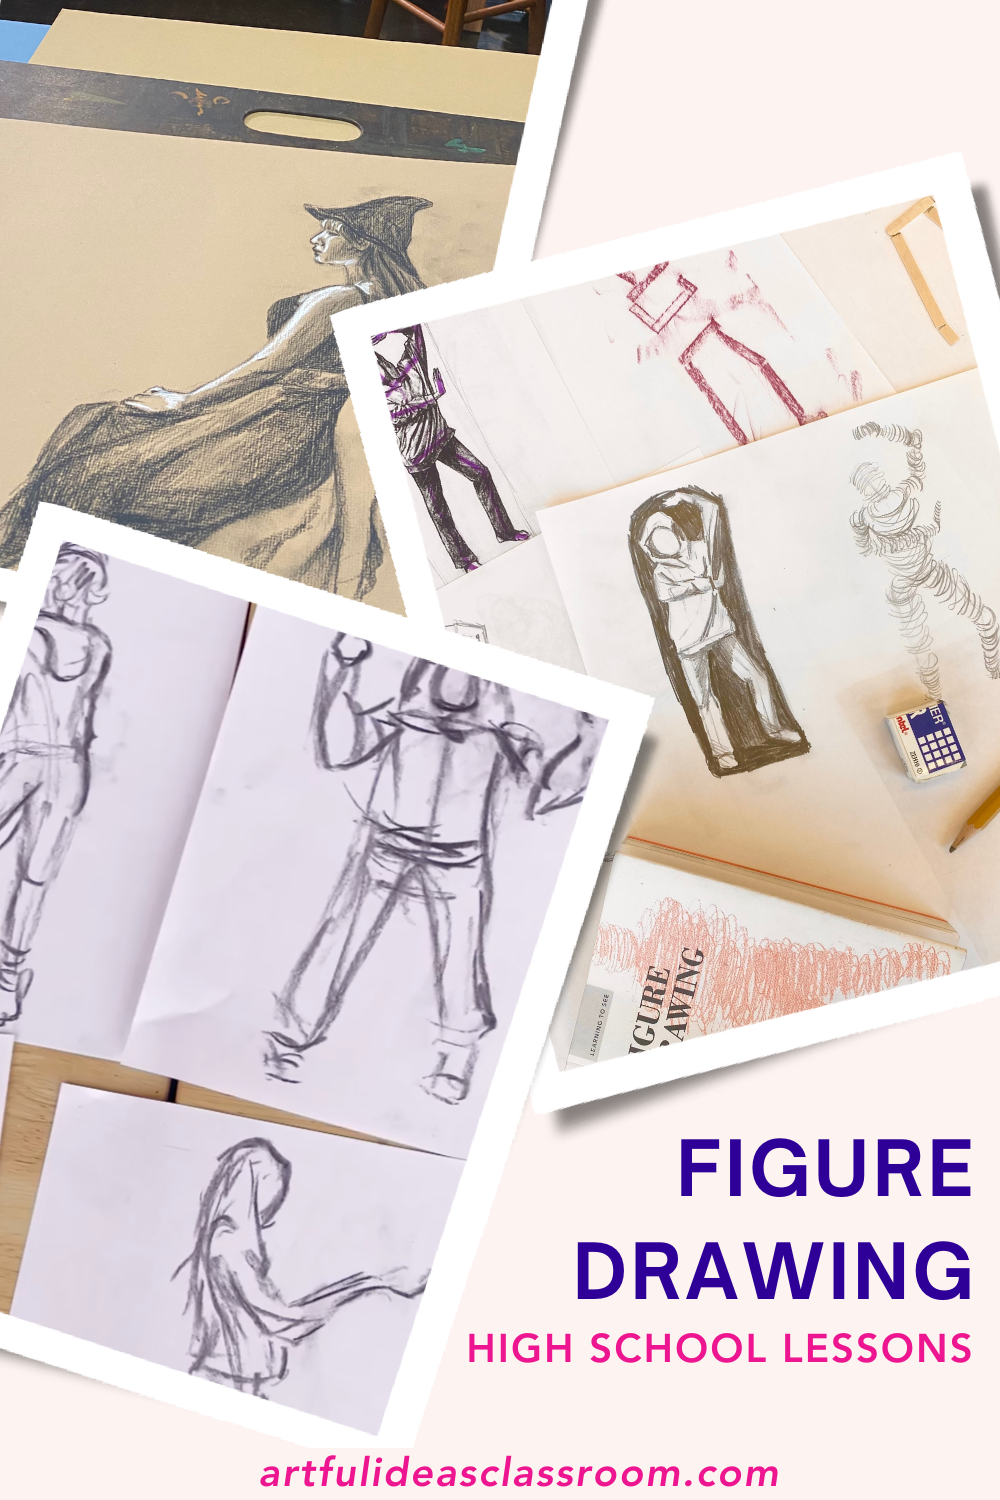 Gesture drawings and figure studies on a table with a pencil 